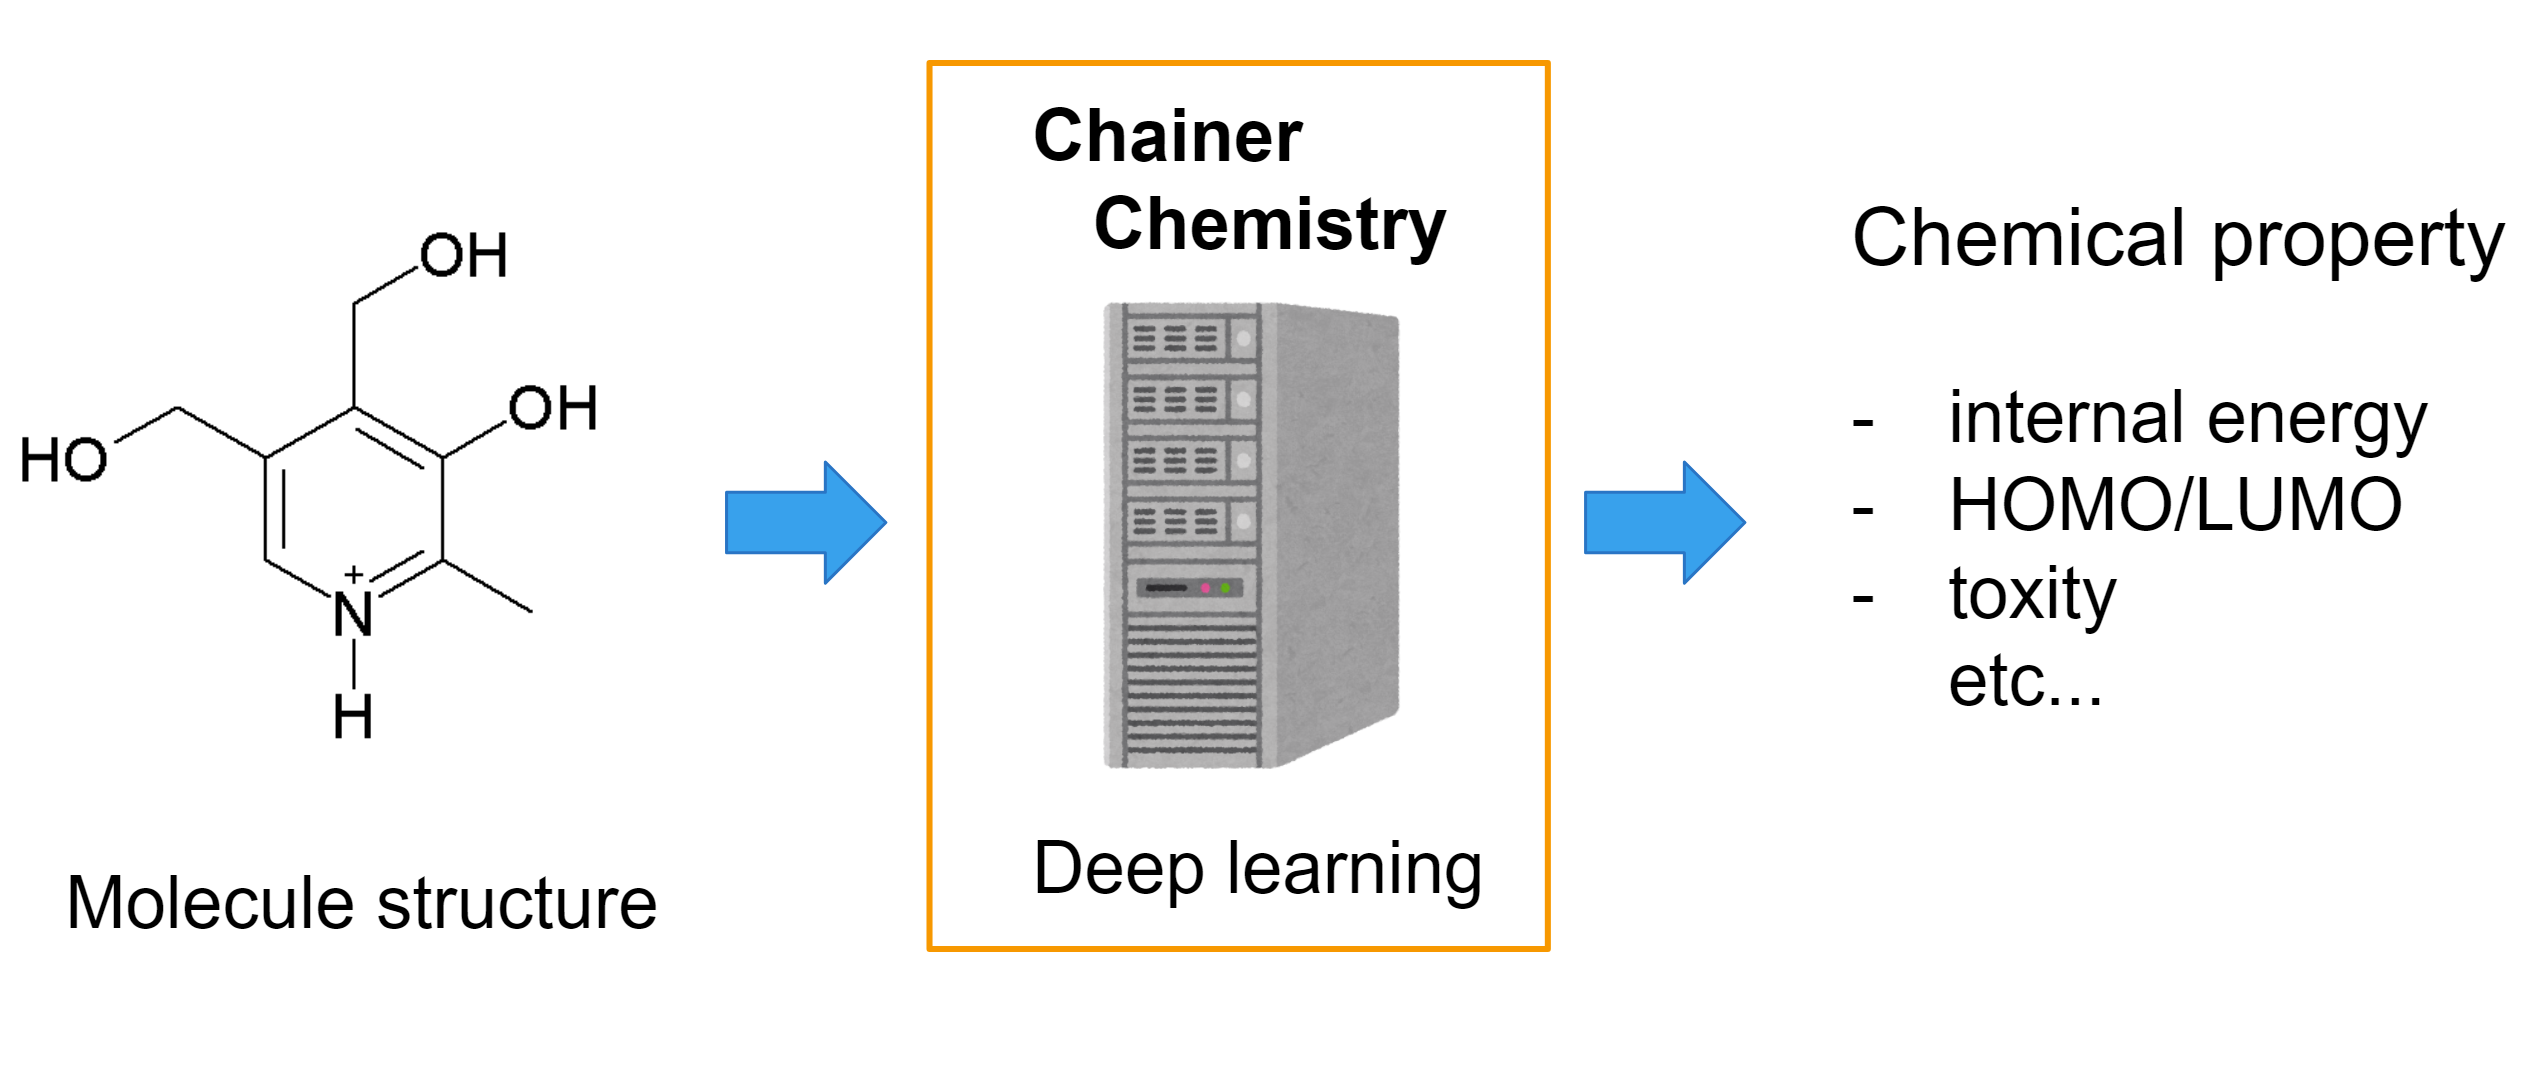 Chainer Chemistry Overview